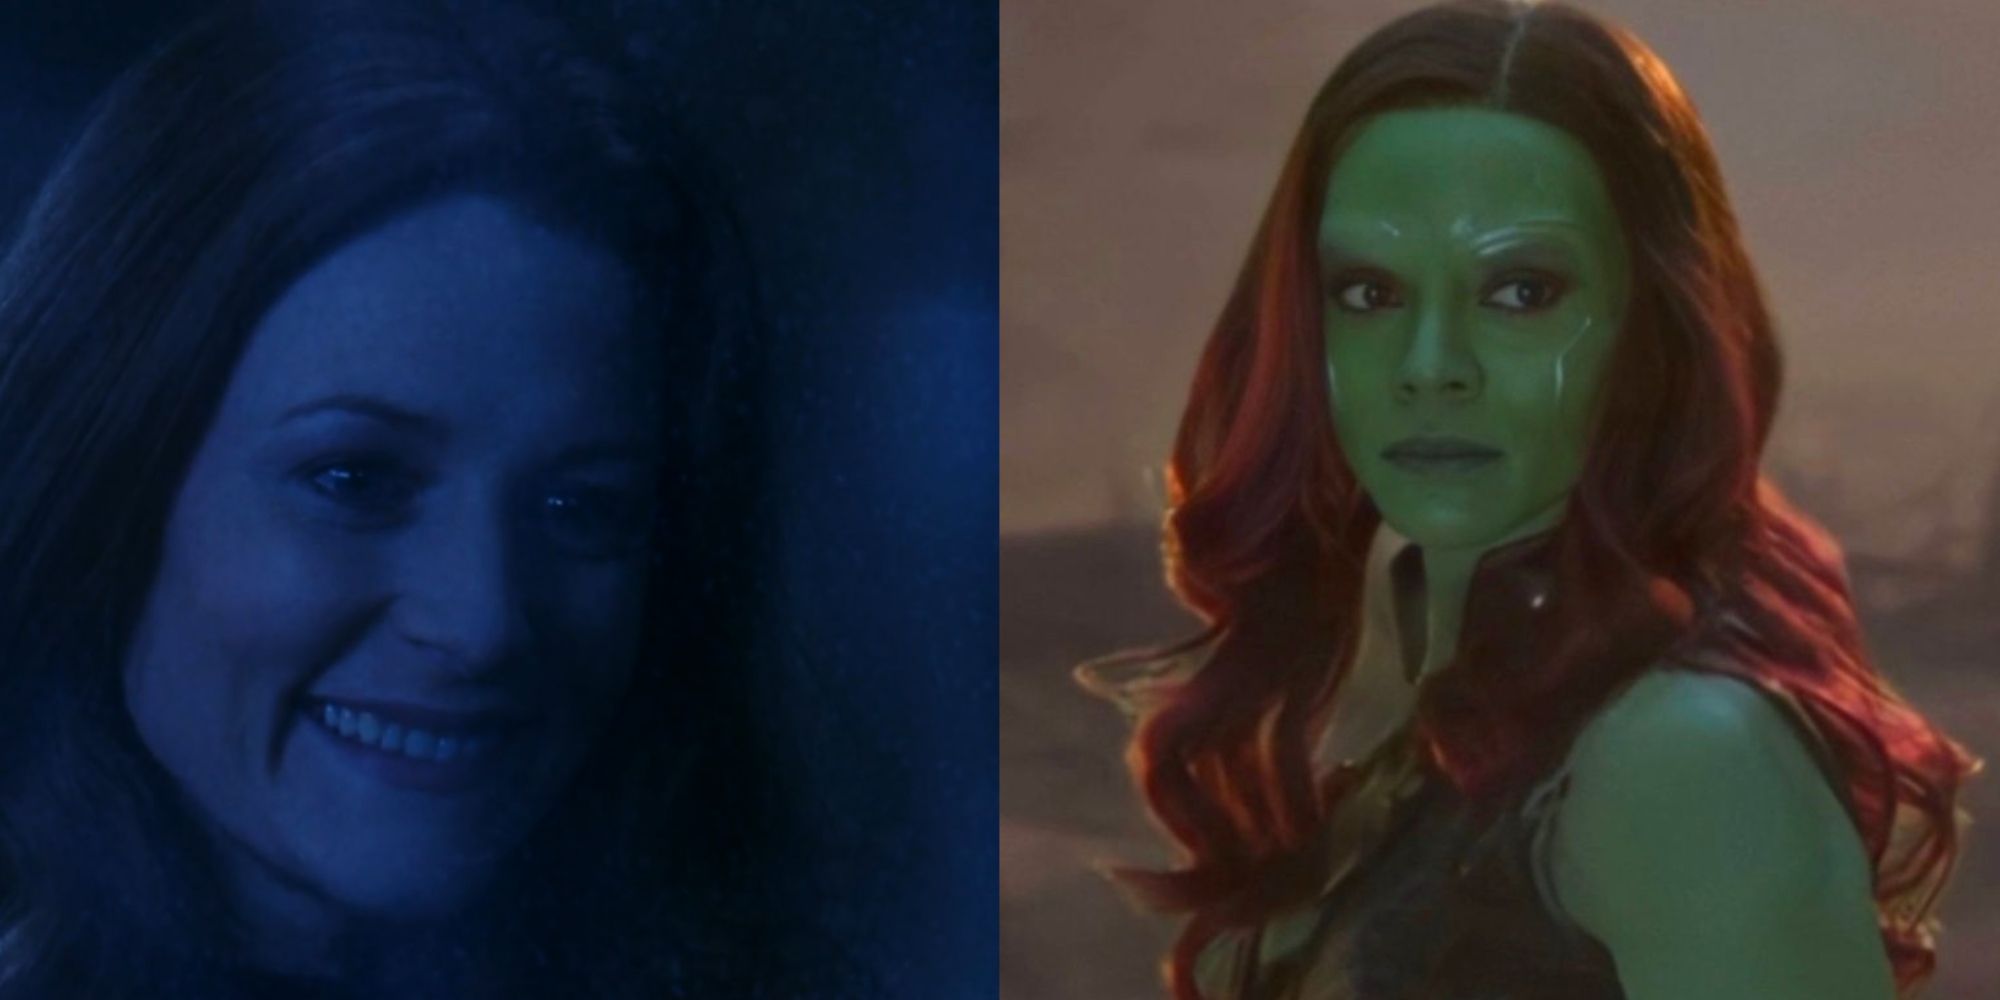 Split images of Lily Potter smiling in Harry Potter and Gamora looking sideways in Avengers Endgame